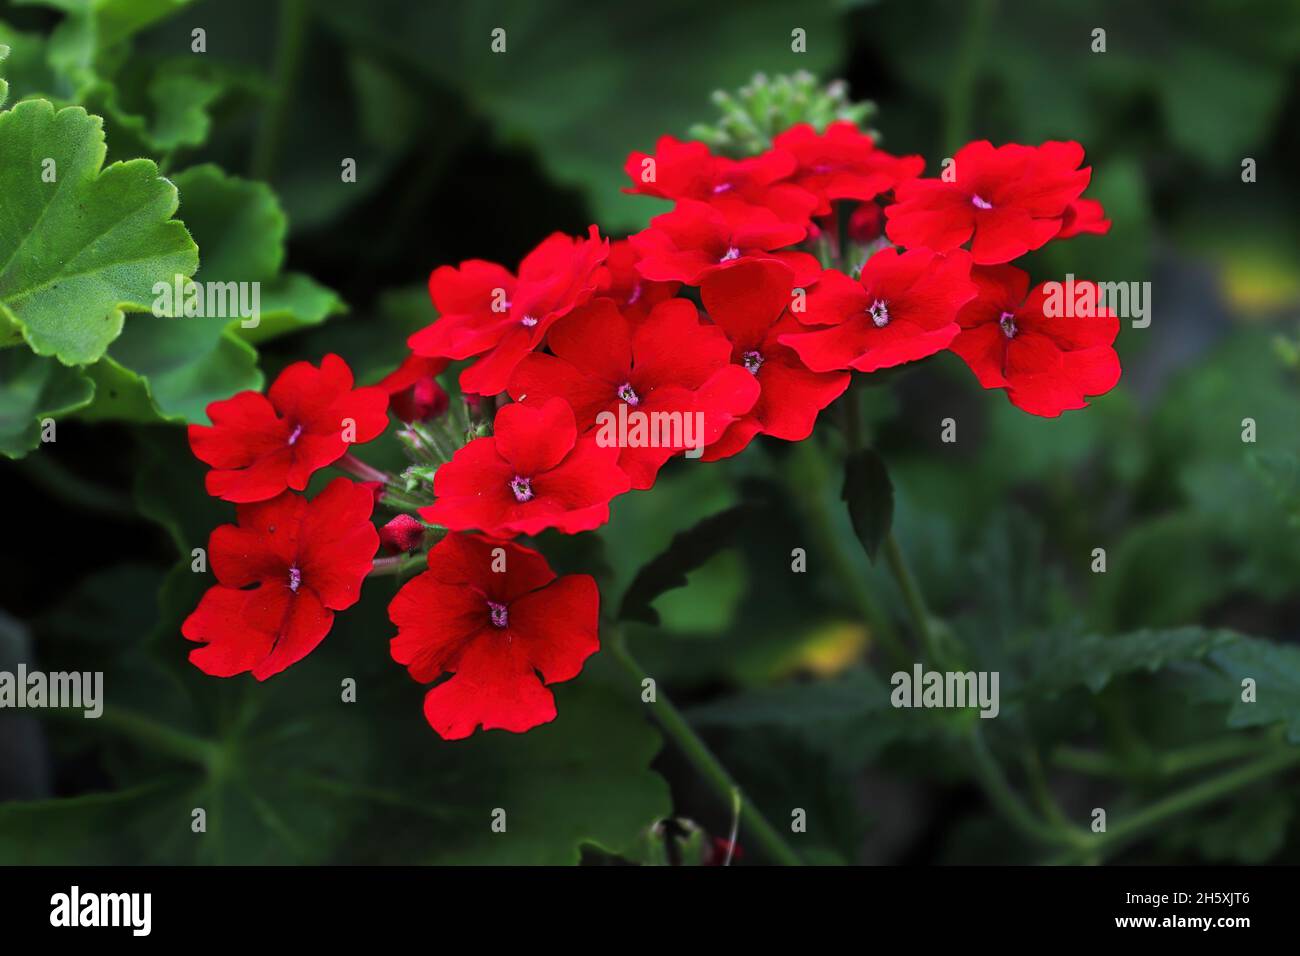 Red verbena flowers in full bloom during spring Stock Photo